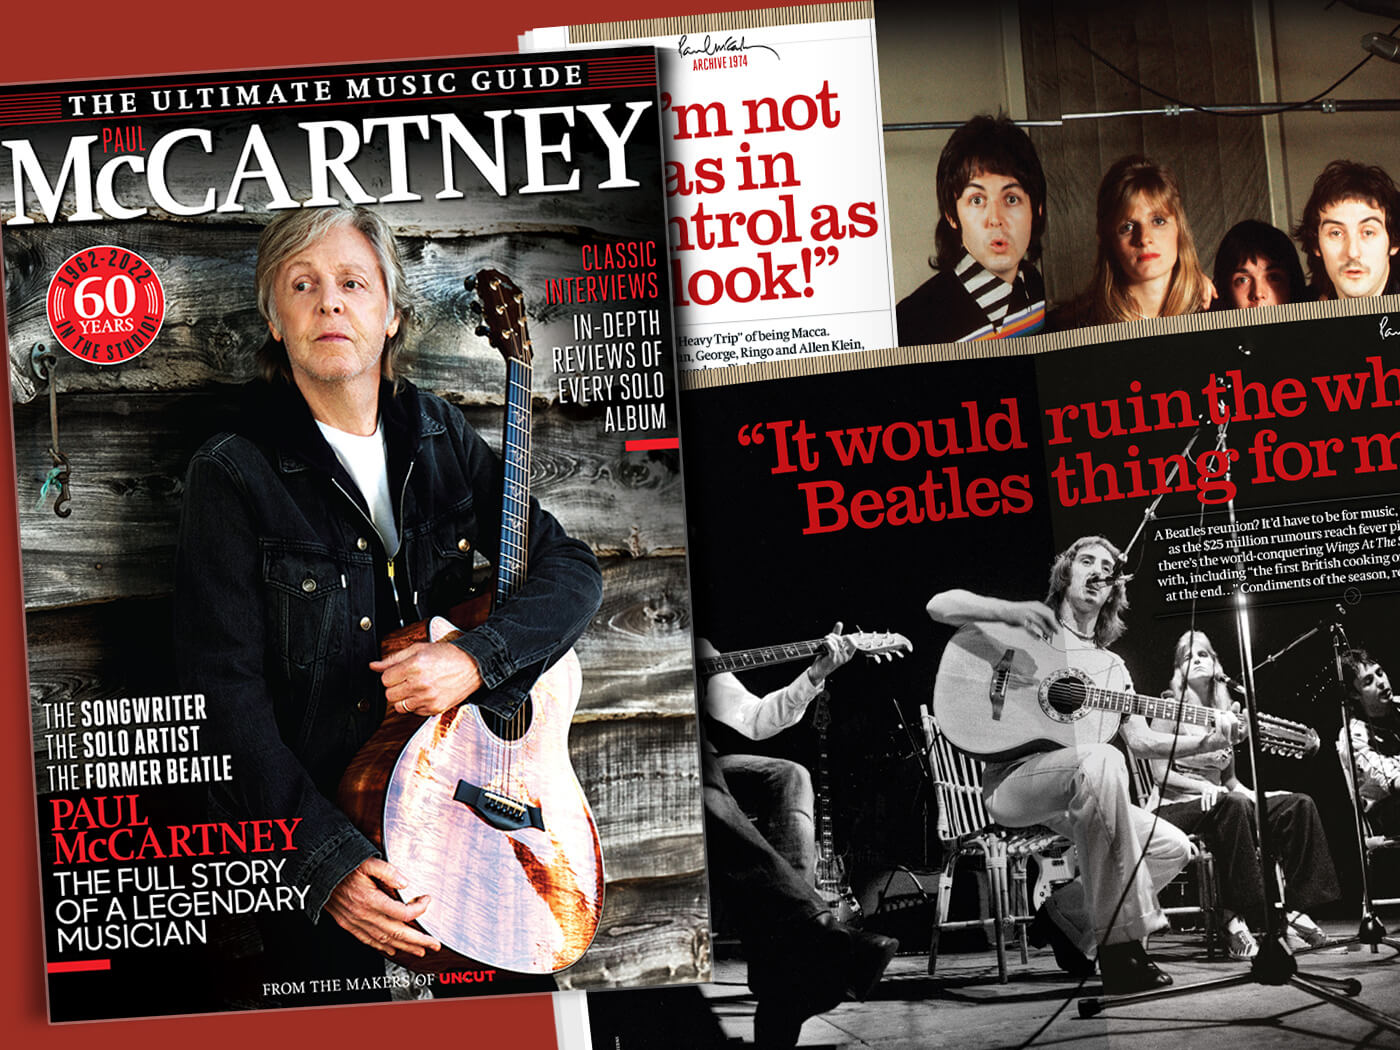 Introducing the Deluxe Ultimate Music Guide to Paul McCartney